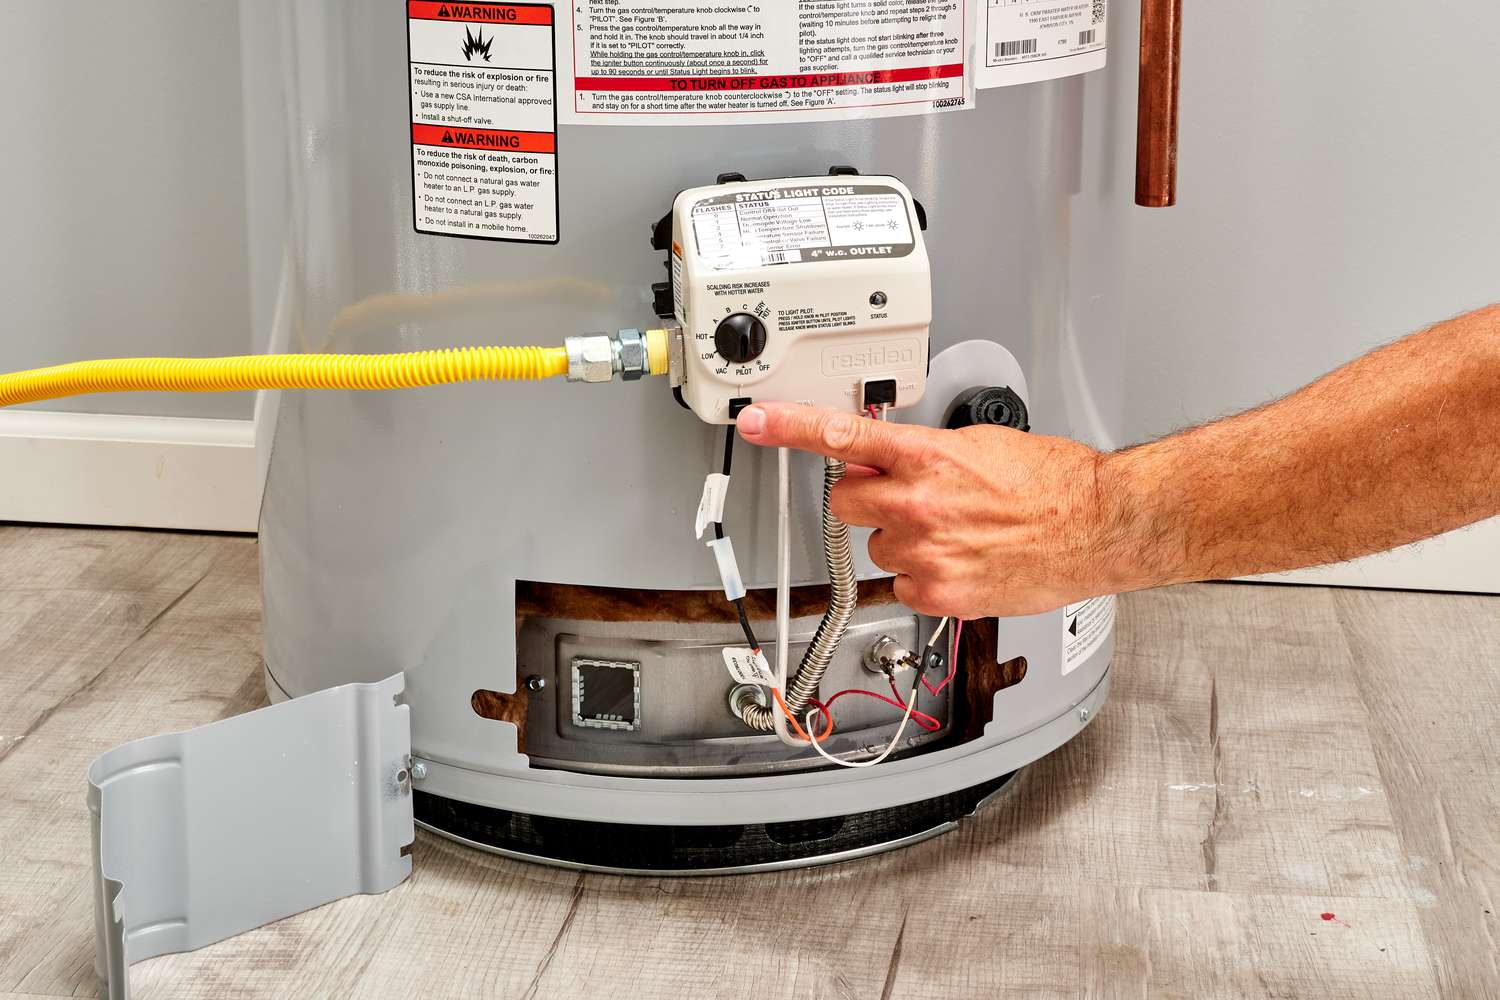 The Surprising Reason Your Electric Water Heater Keeps Shutting Off – And How To Fix It!